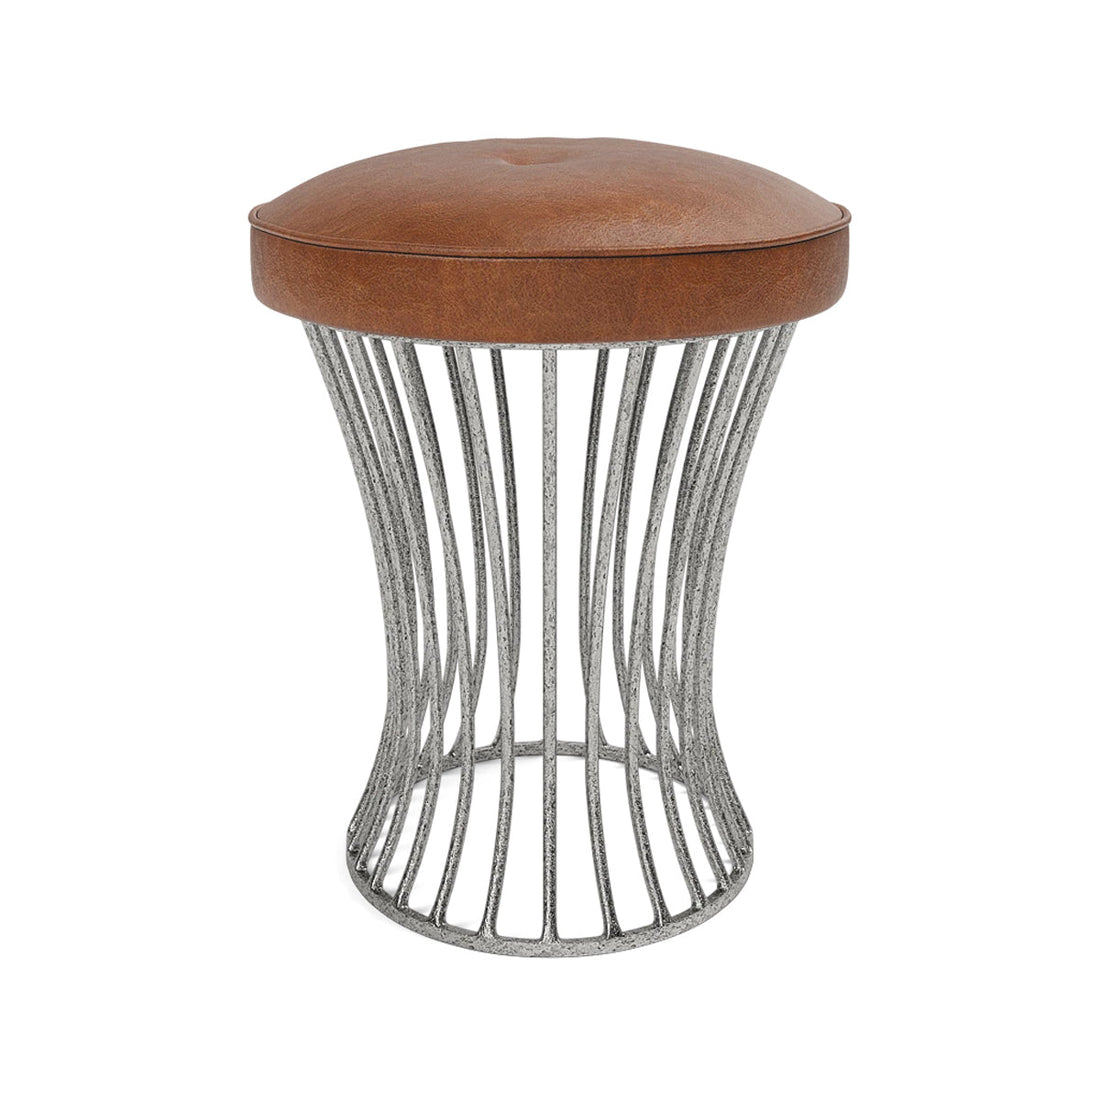 Made Goods Roderic Oval Stool in Colorado Leather